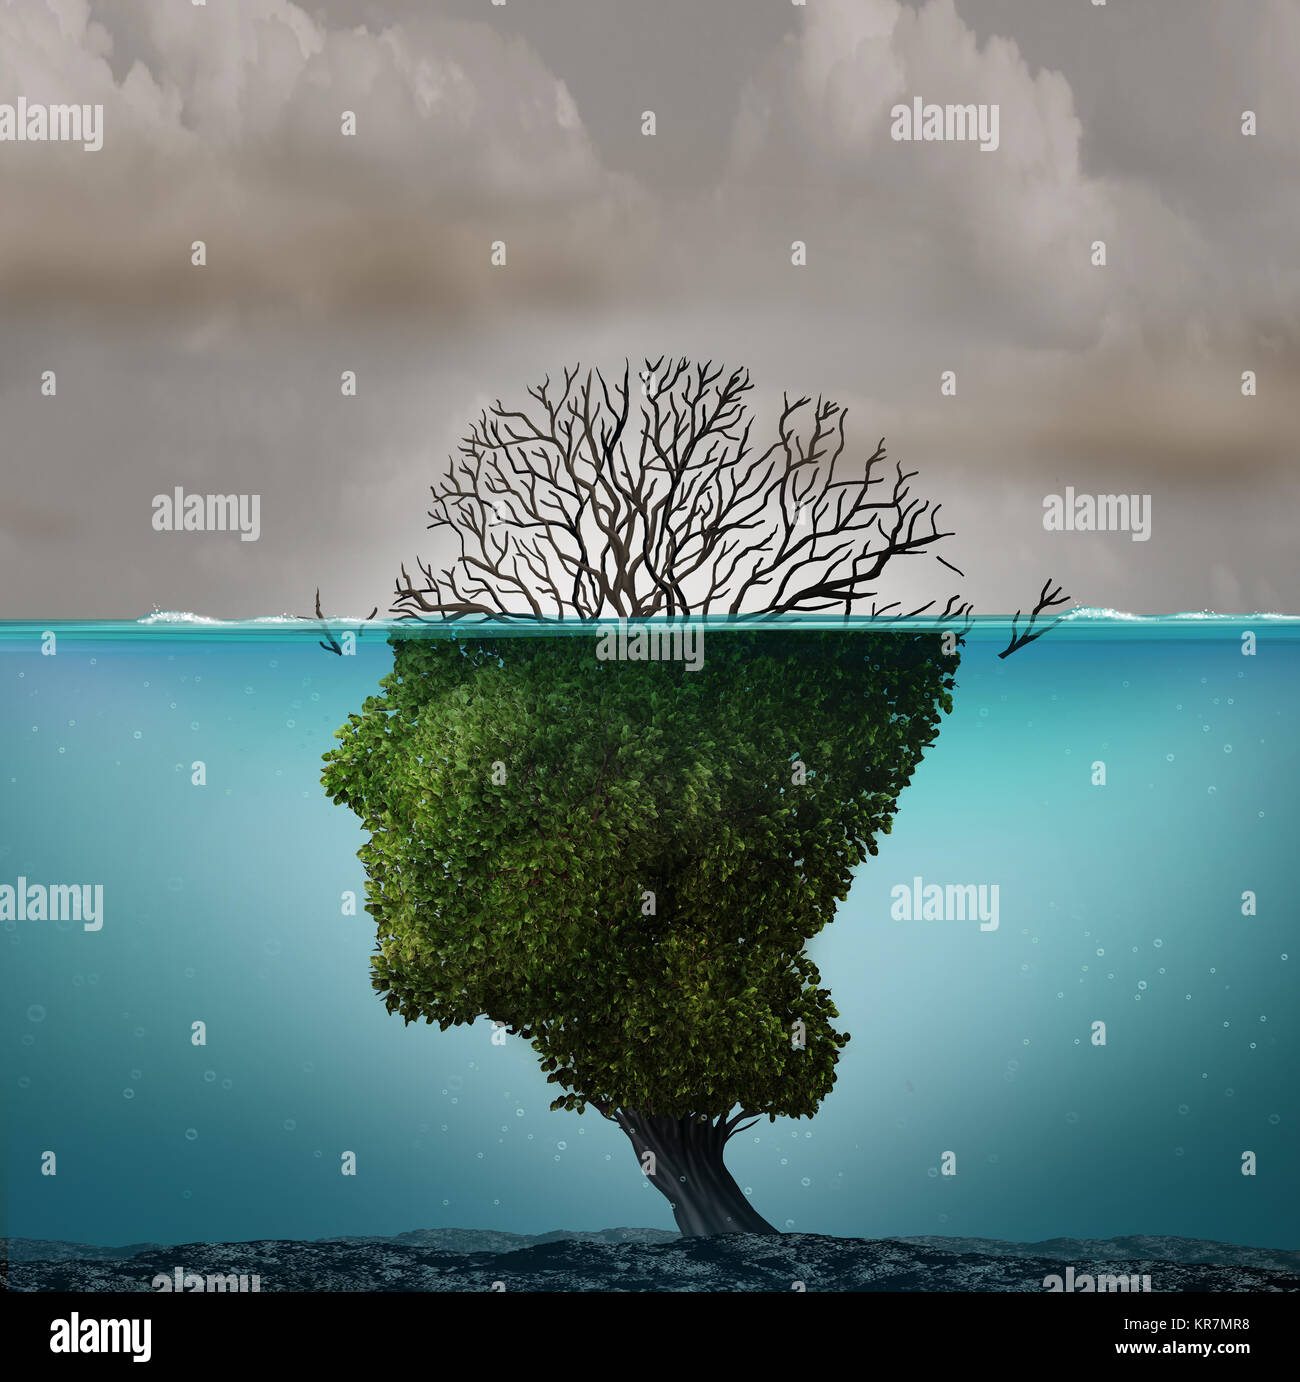 Polluted air contamination with hazardous industrial toxic emissions as a tree shaped as a human head underwater with the hazardous gas killing. Stock Photo